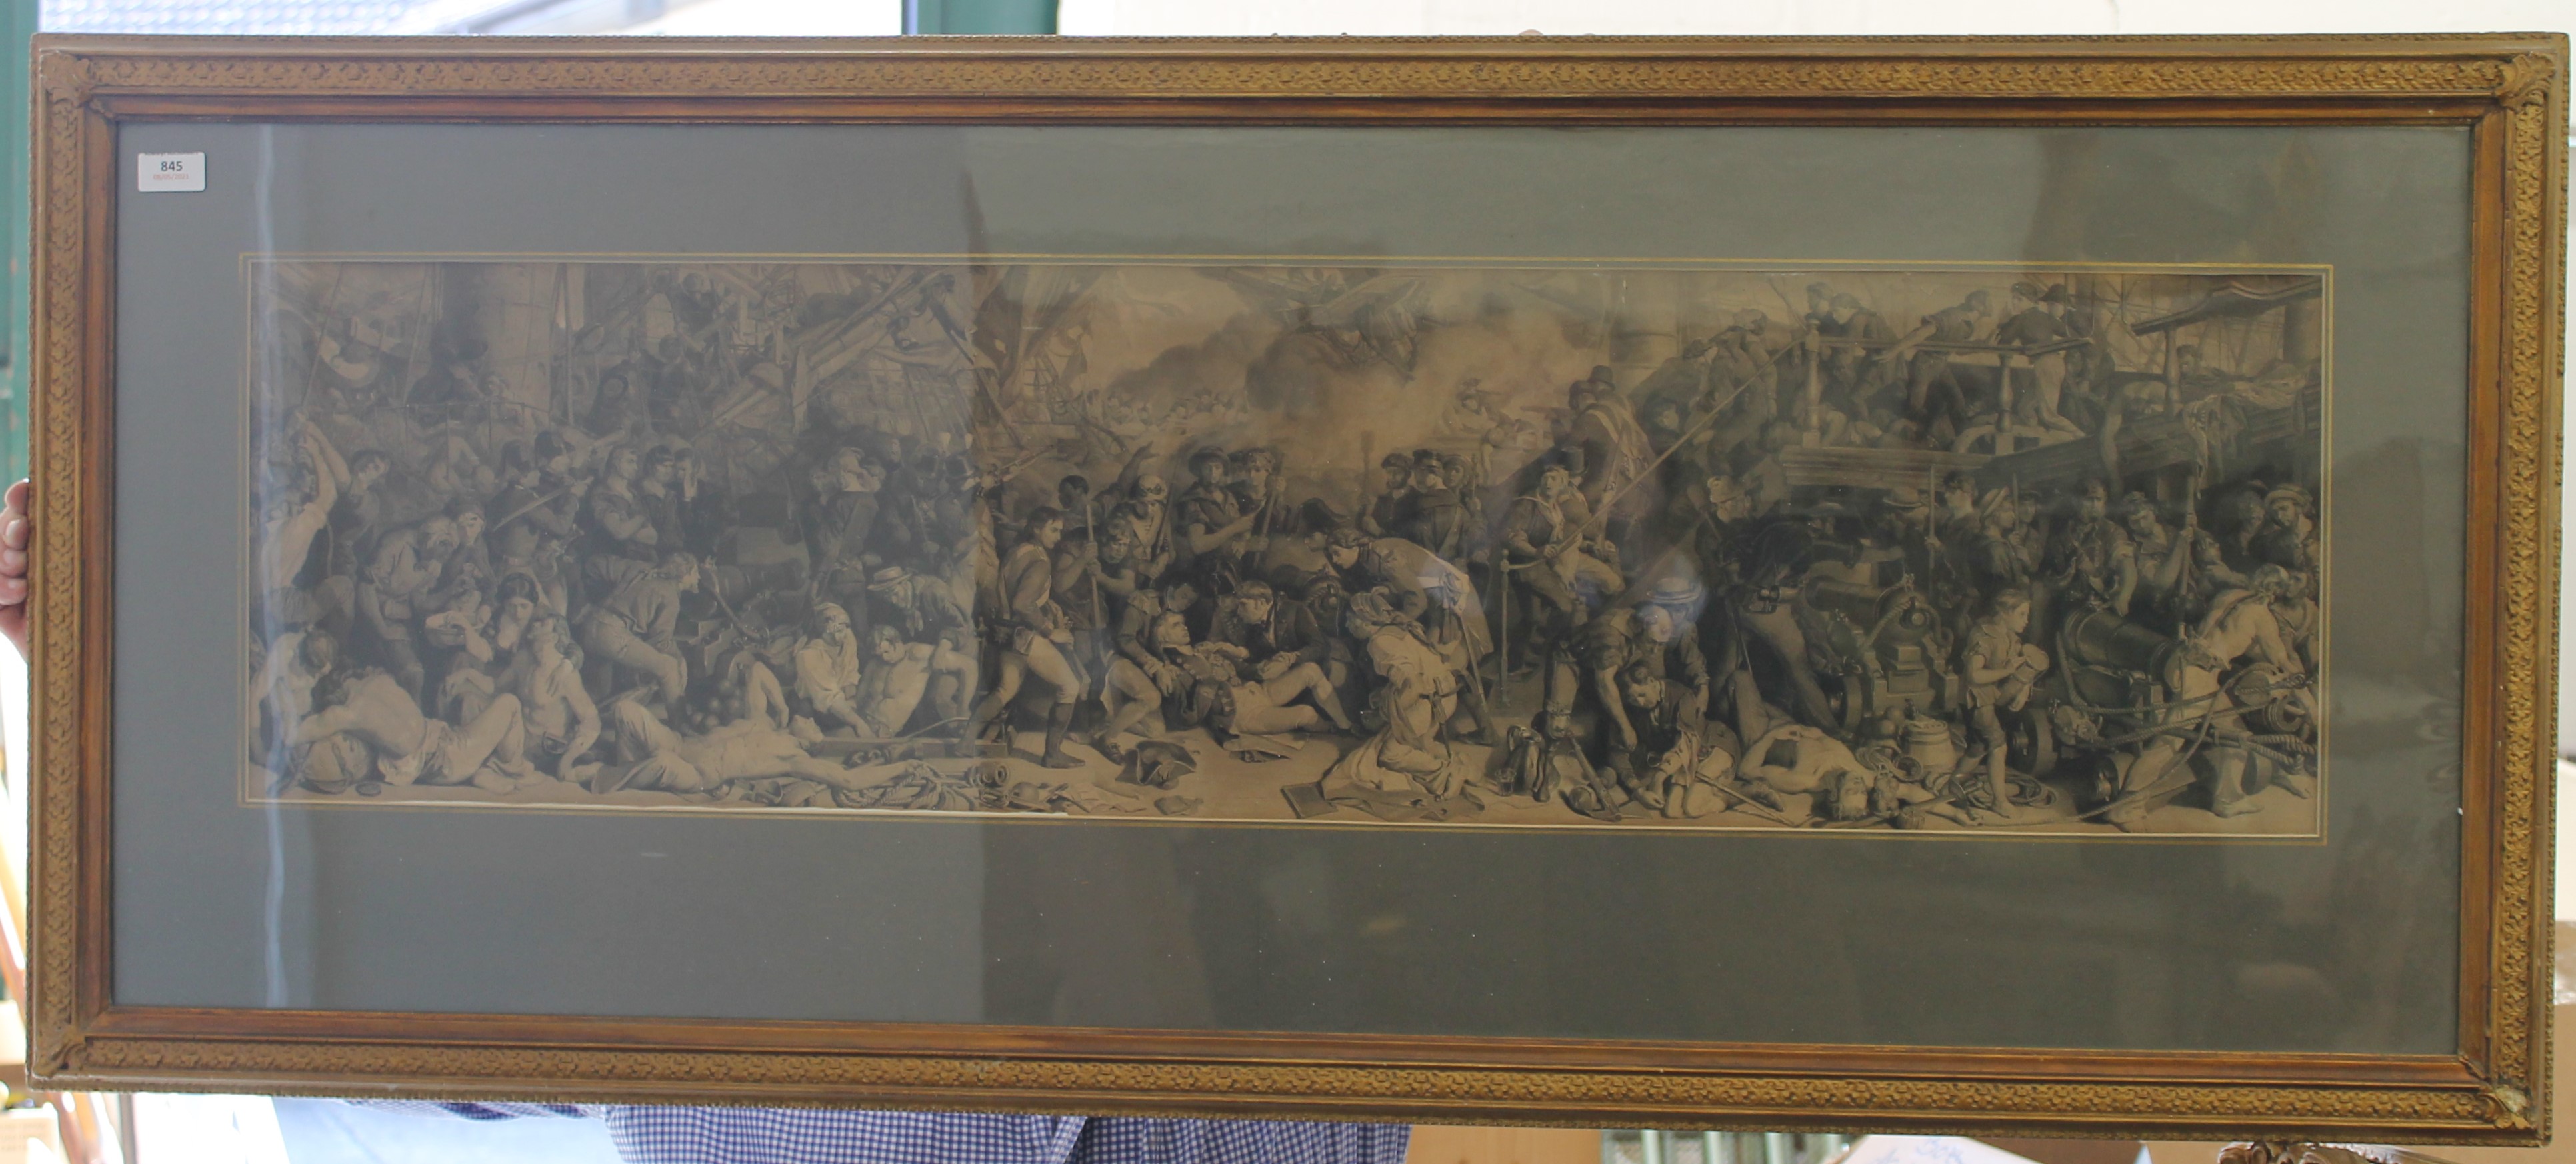 19TH CENTURY, Death of Nelson, lithograph, framed and glazed. 137 x 60 cm. - Image 4 of 4